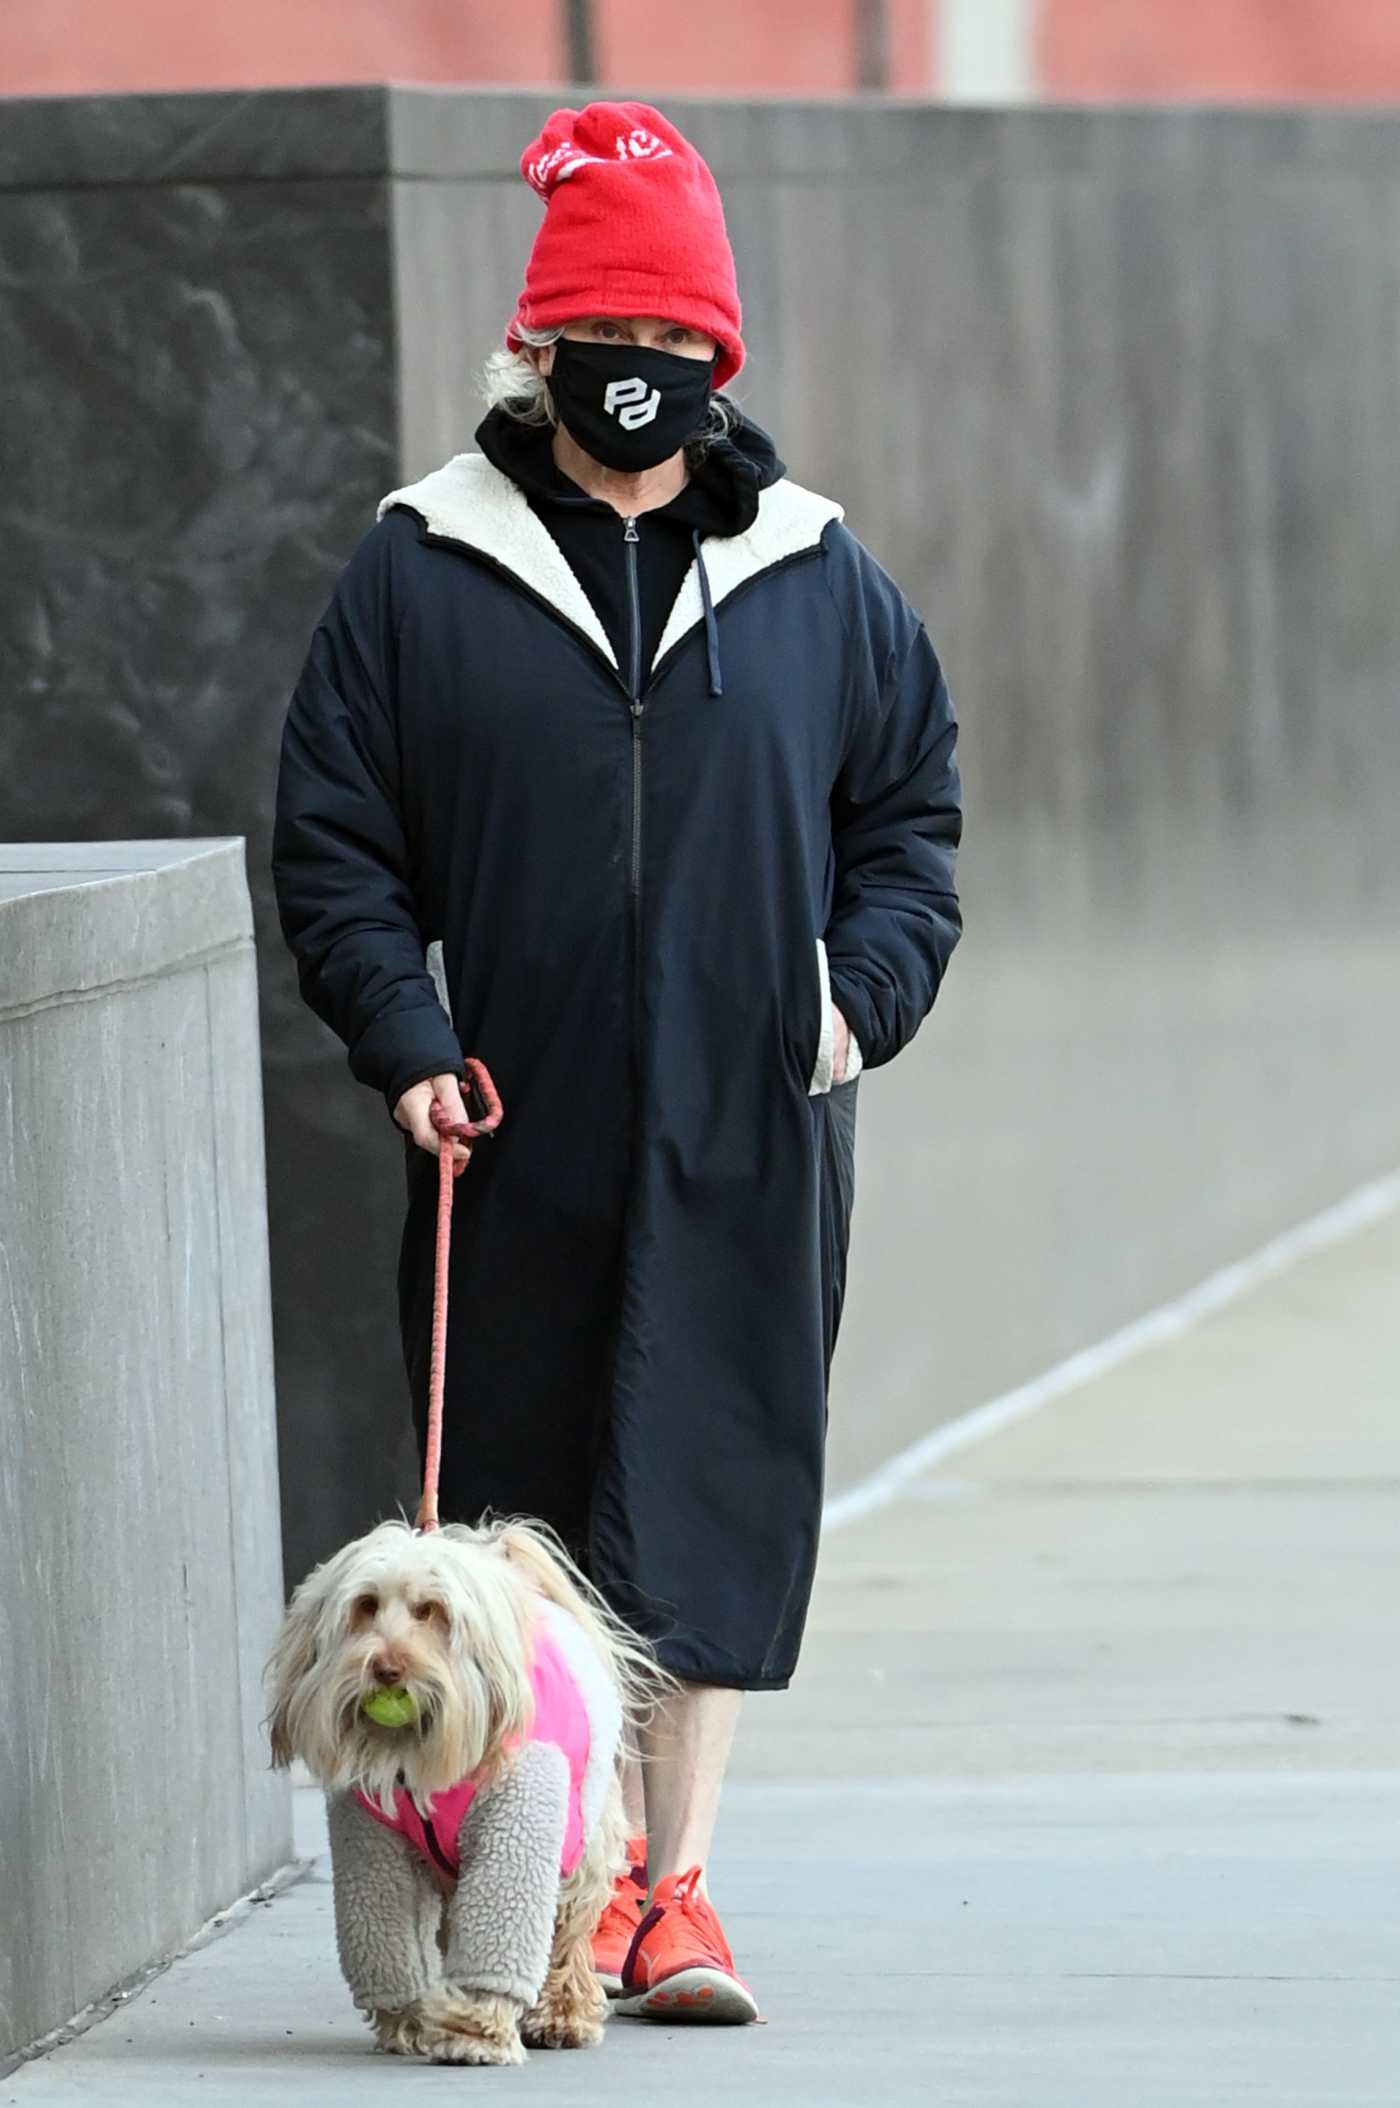 Deborra-Lee Furness in a Red Knit Hat Walks Her Dogs Out with Hugh Jackman in the Hudson River Side in New York 01/19/2021